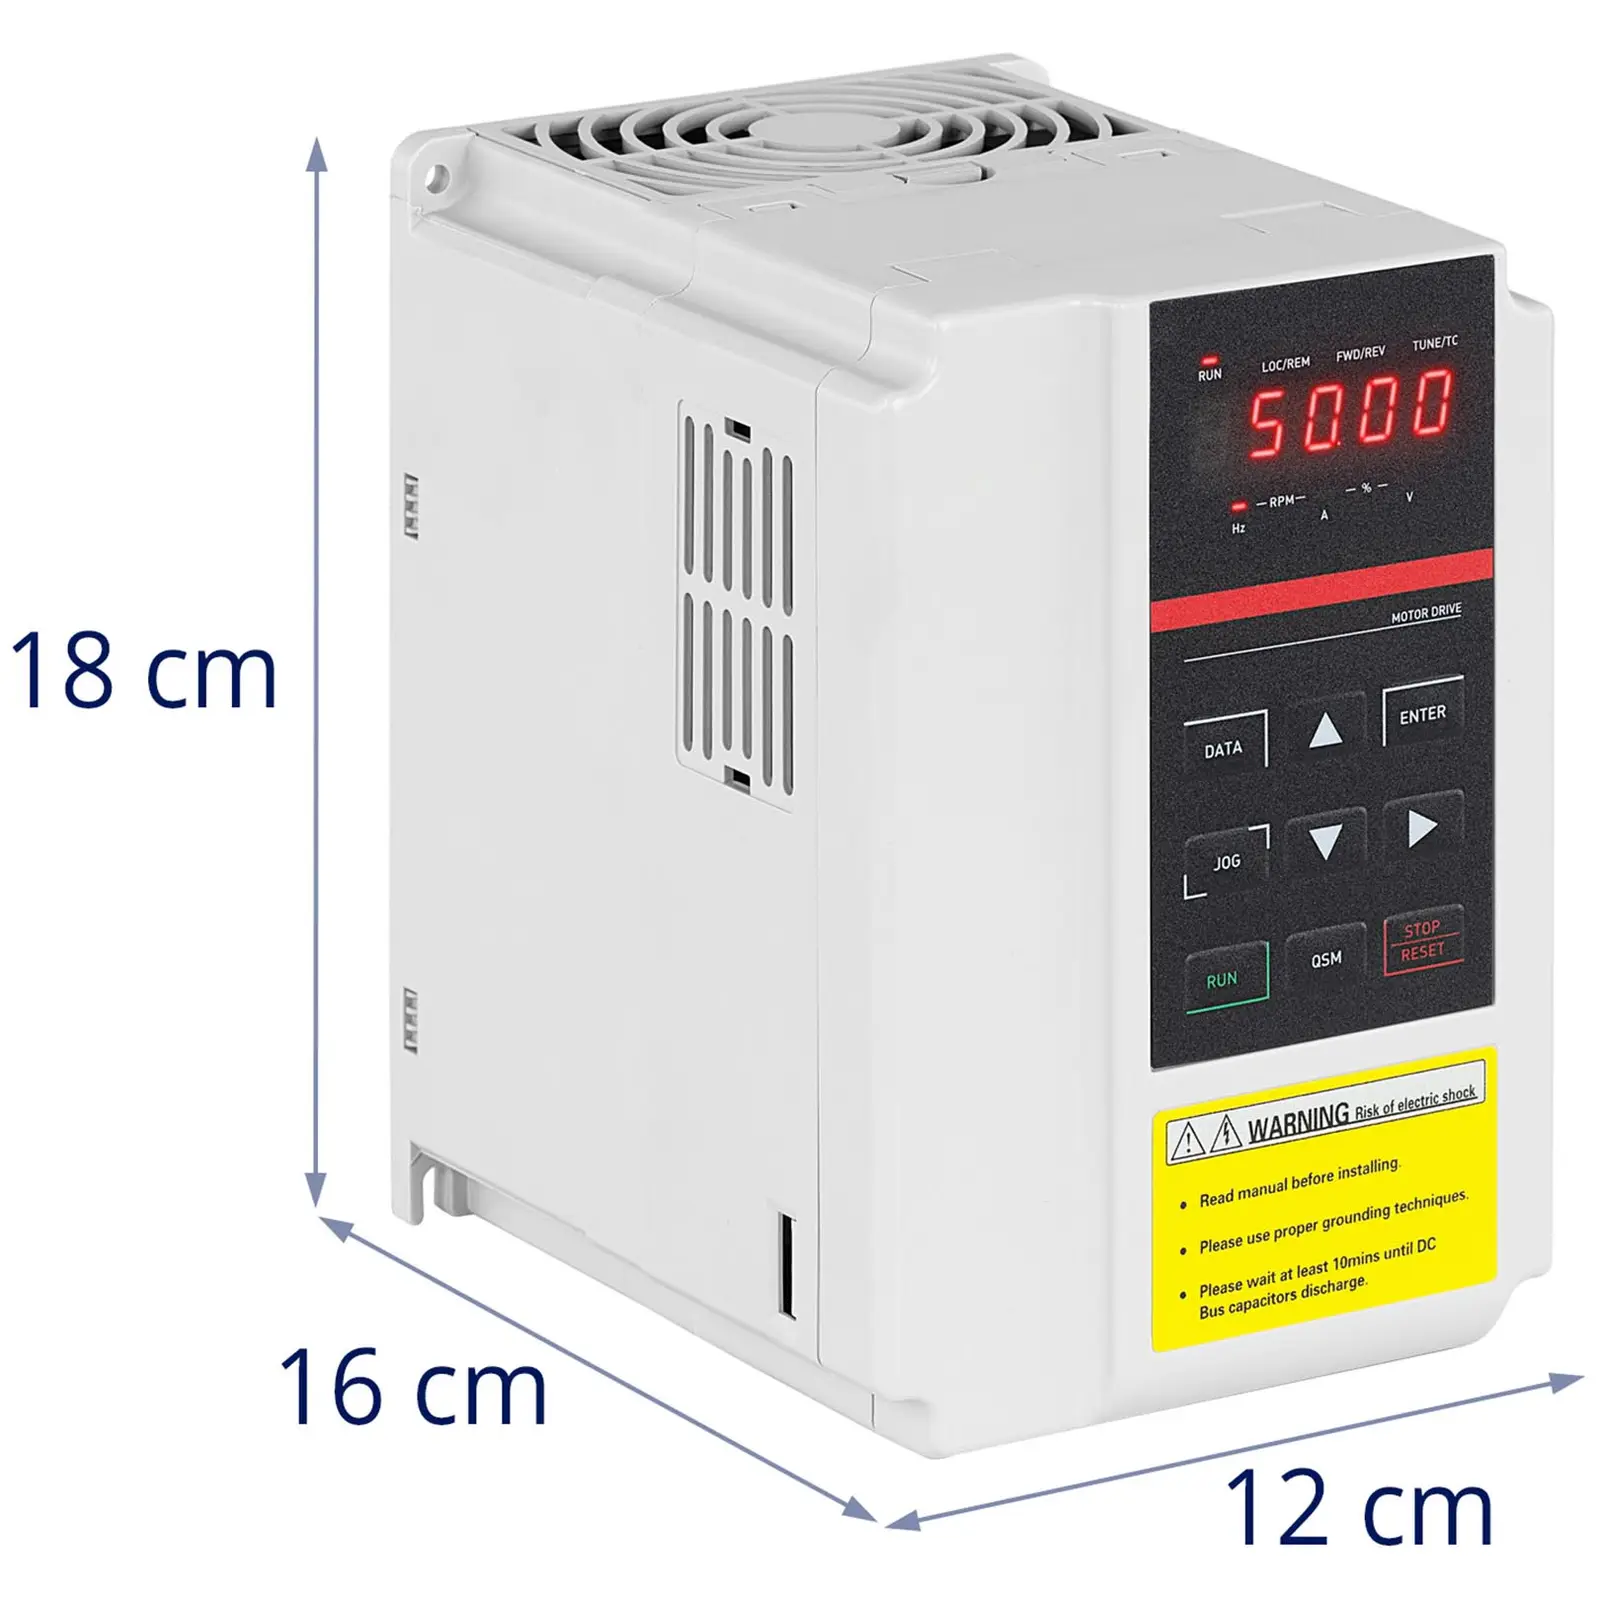 Factory second Frequency Converter - 1.5 kW / 2 hp - 380 V - 50 - 60 Hz - LED